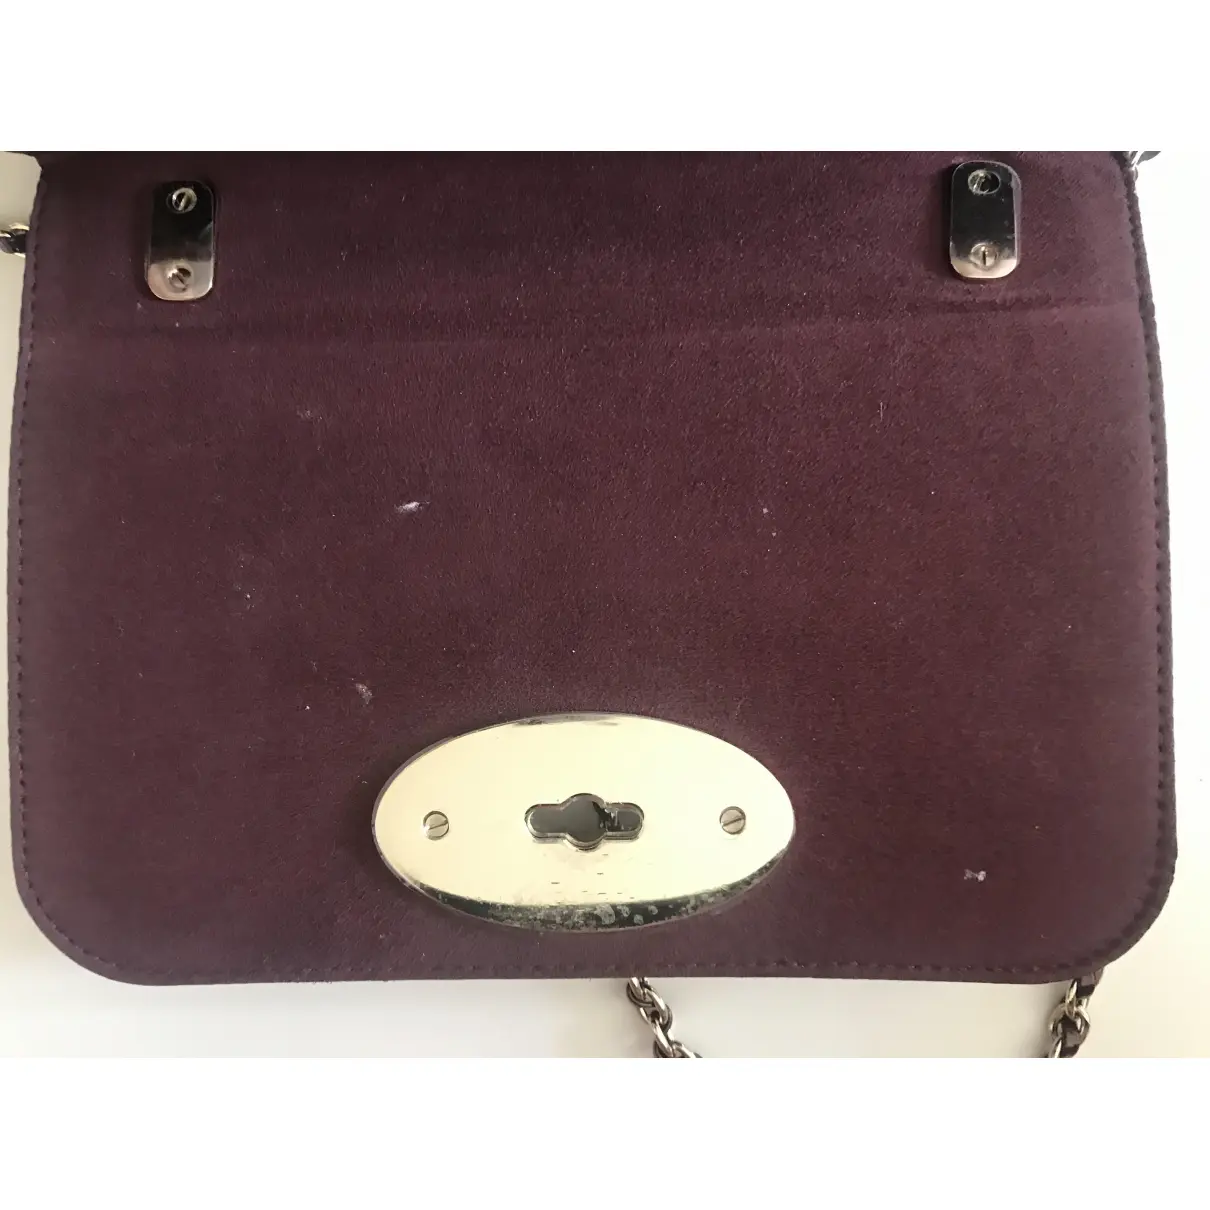 Lily patent leather handbag Mulberry